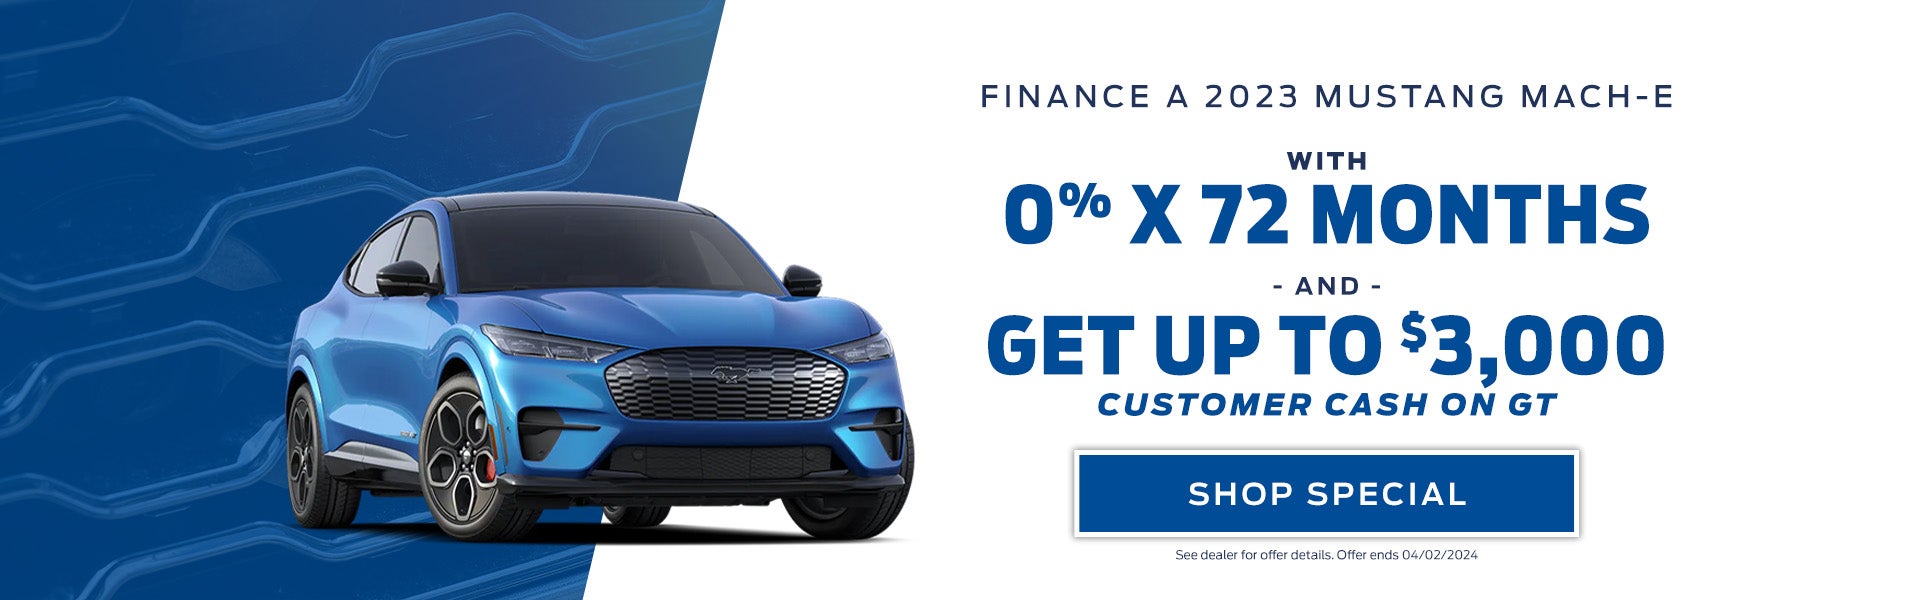 finance a 2023 ford mustang mach-e with 0% for 72 months 